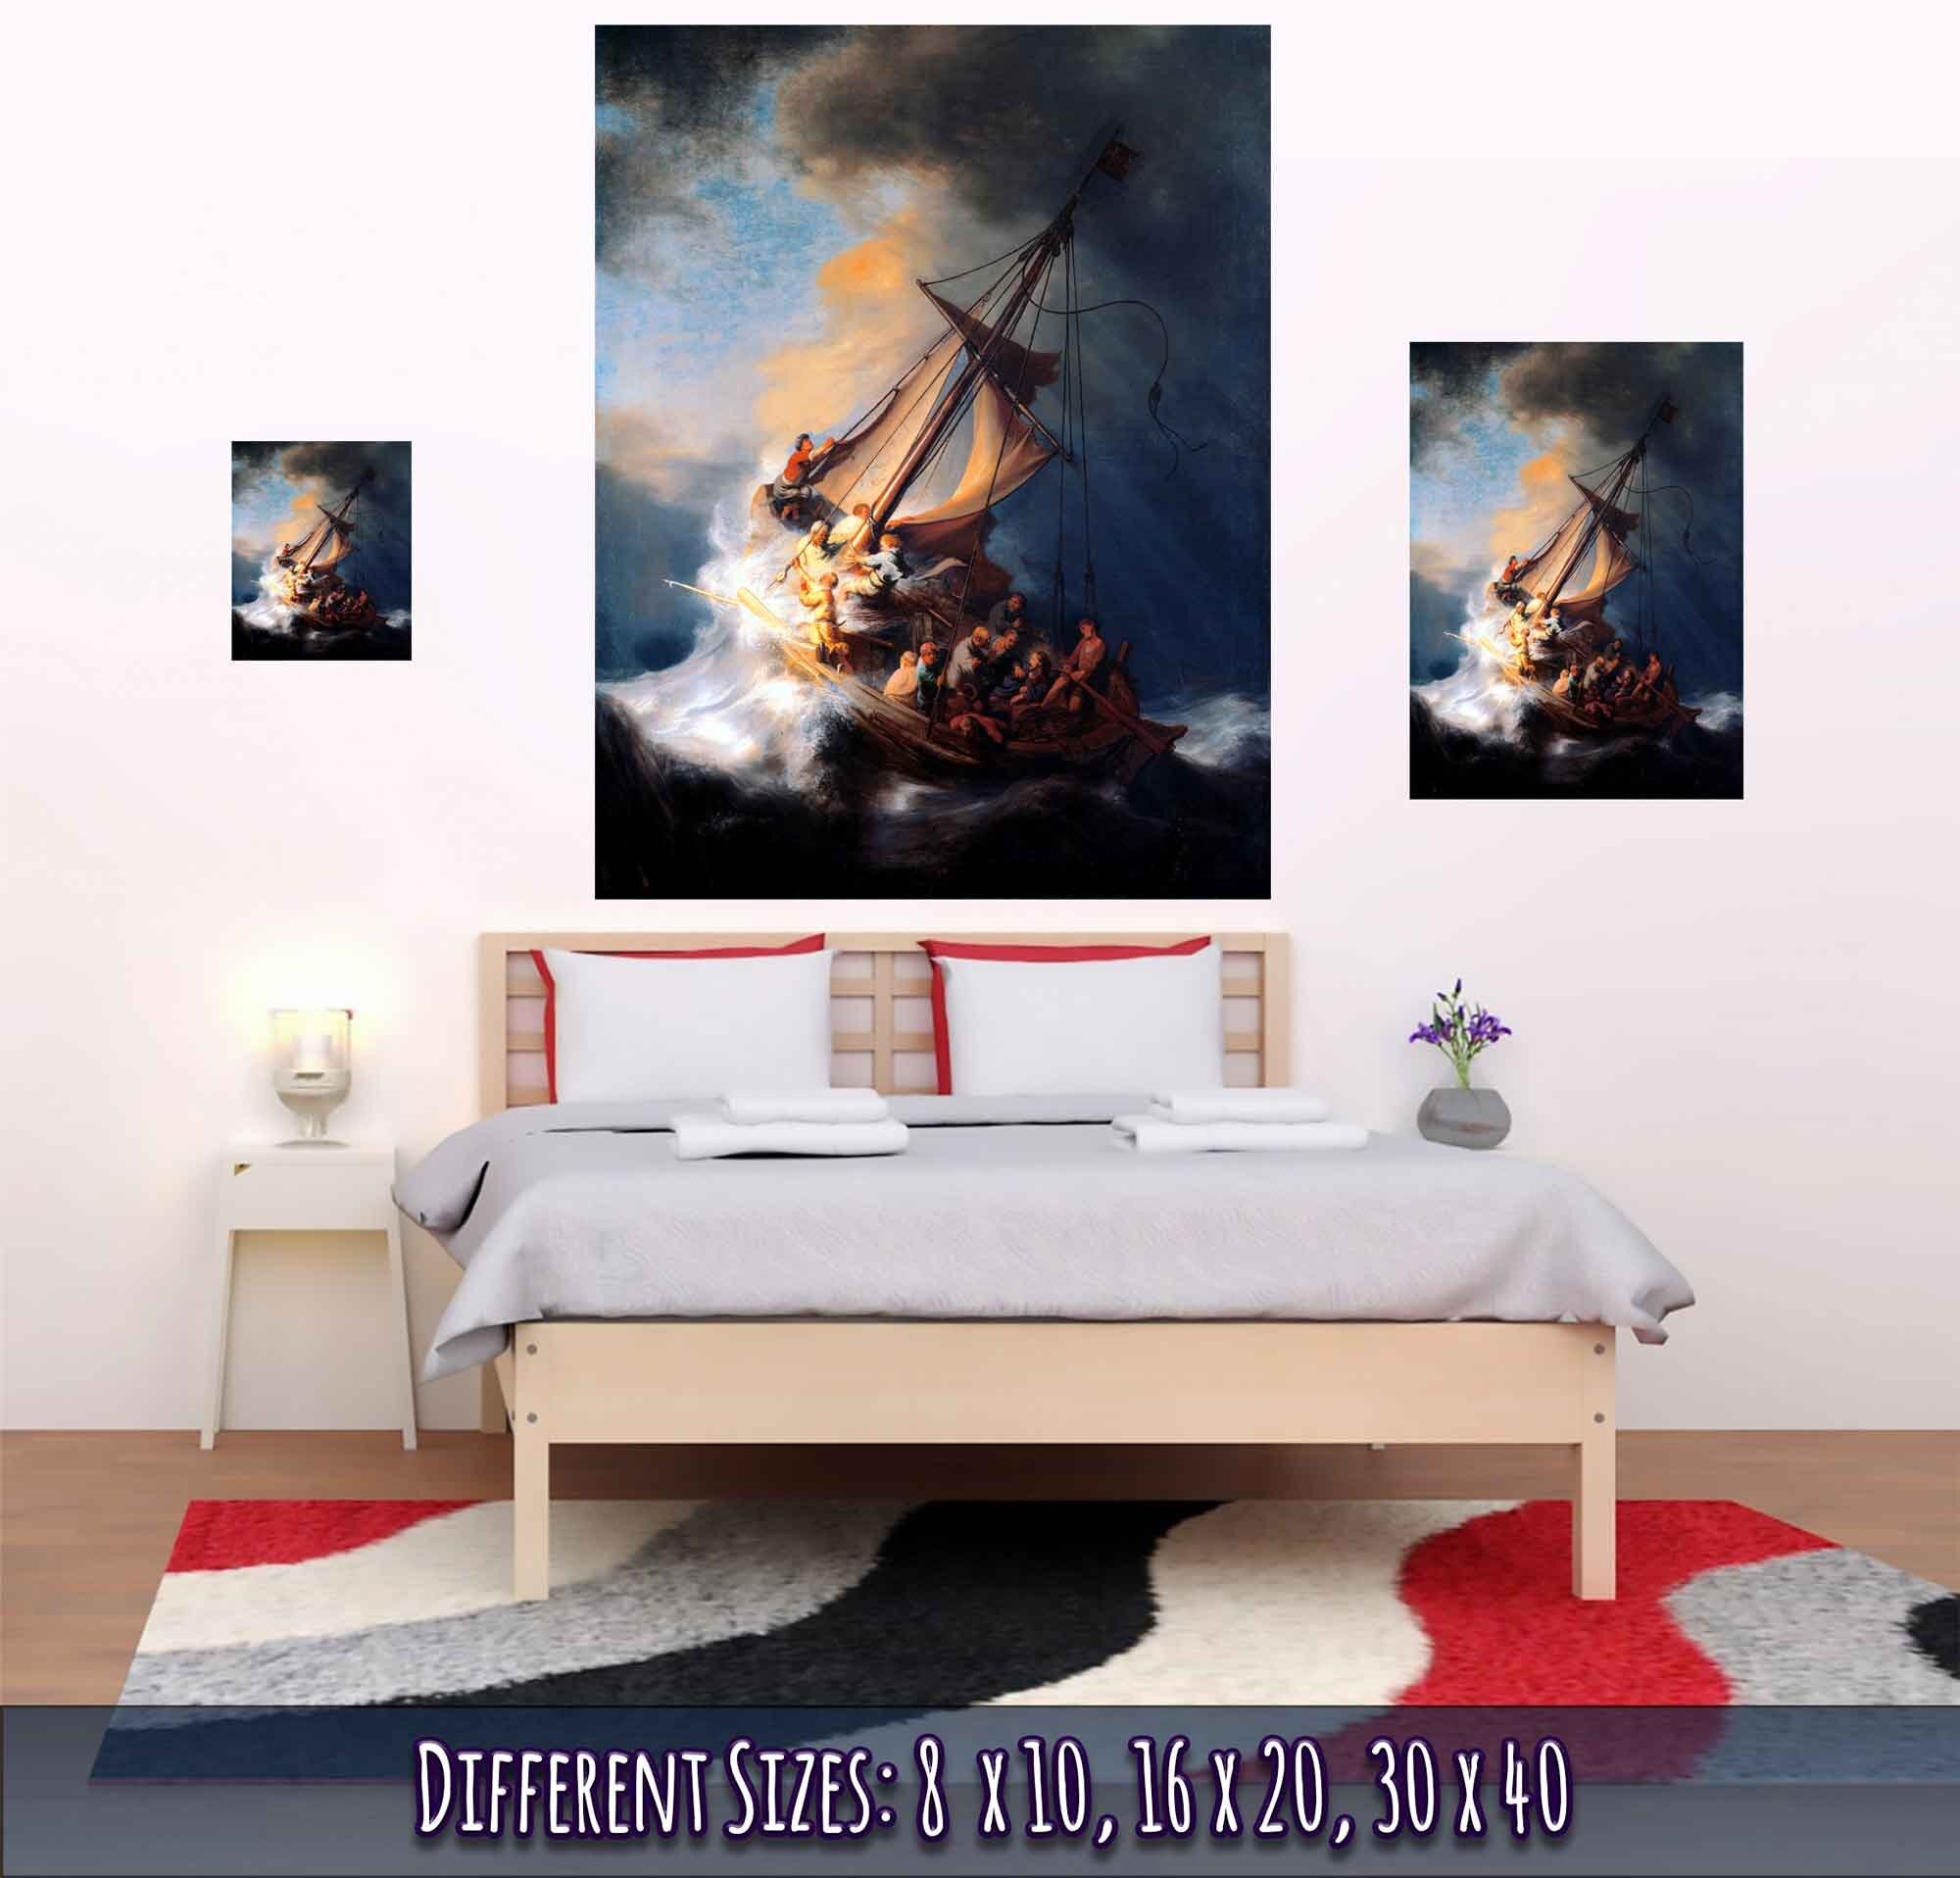 Storm Of The Sea Of Galilee Poster, Rembrandt - Storm Of The Sea Of Galilee Print - WallArtPrints4U